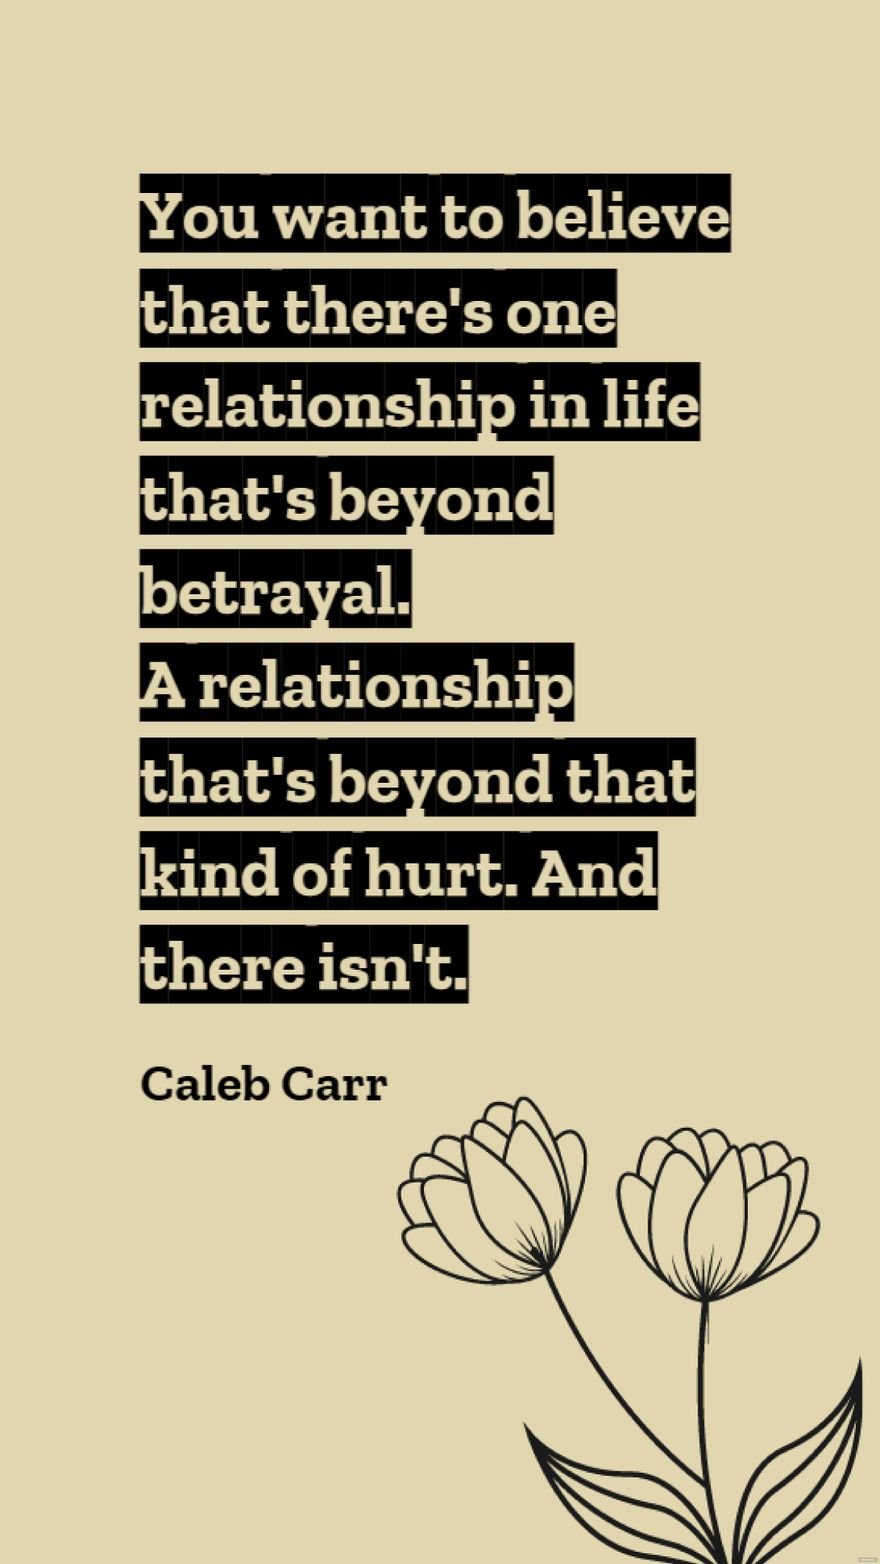 Caleb Carr - You want to believe that there's one relationship in life that's beyond betrayal. A relationship that's beyond that kind of hurt. And there isn't.